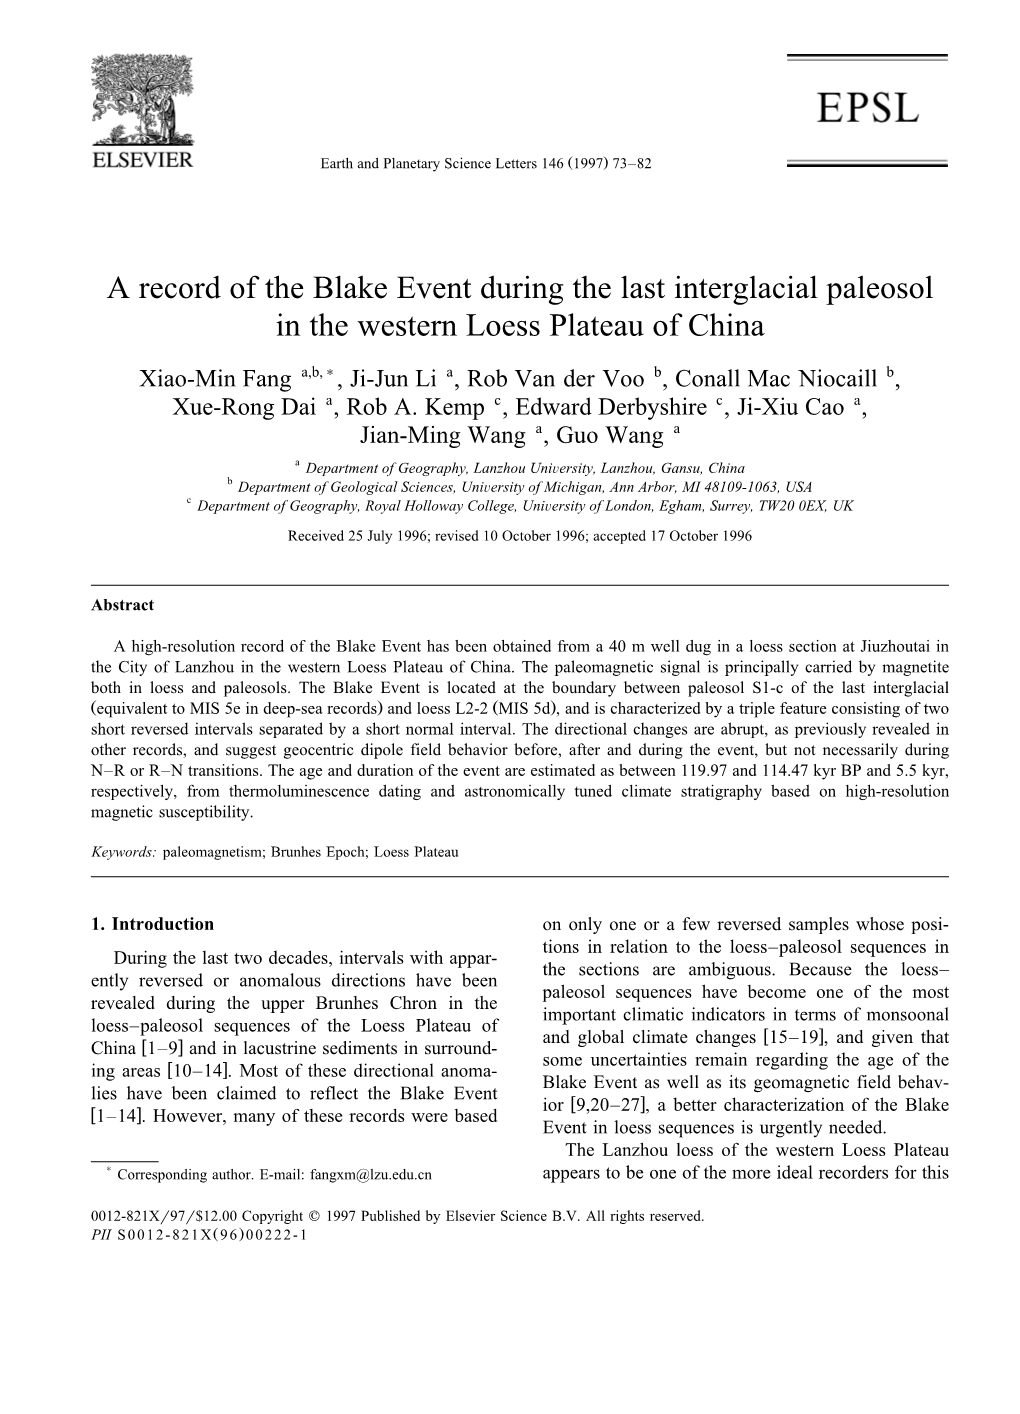 A Record of the Blake Event During the Last Interglacial Paleosol in the Western Loess Plateau of China